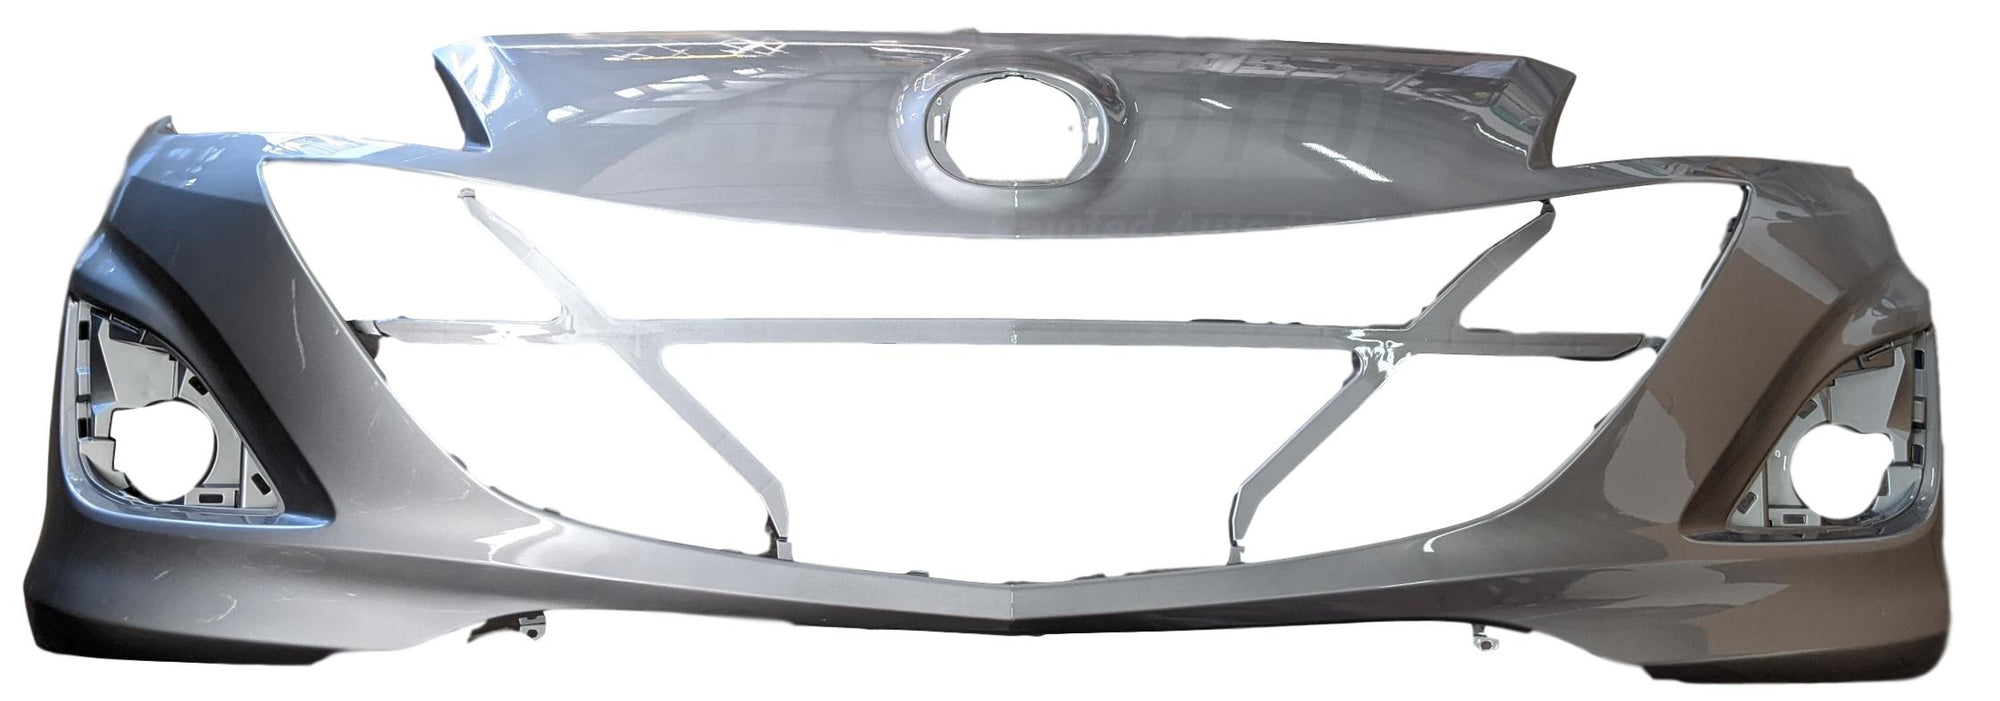 2013 Mazda3 Front Bumper Cover Painted, Liquid Silver Metallic (38P), Hatchback, w_ Mazdaspeed, 2.3L Eng._BBN650031EBB